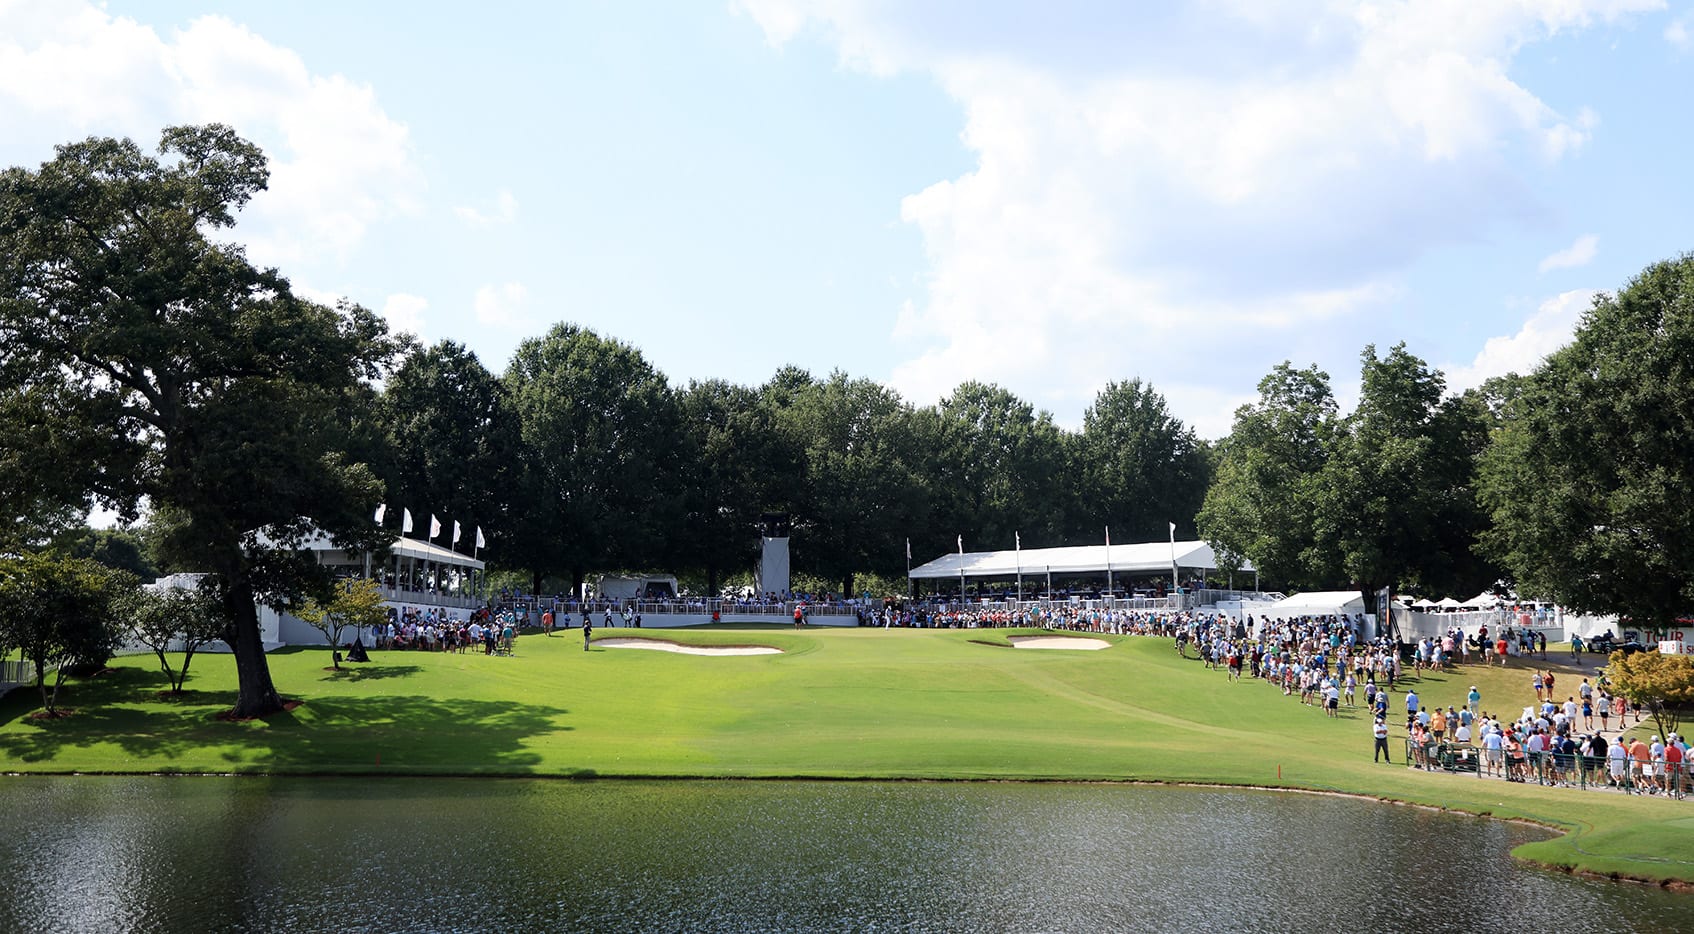 How to Watch the TOUR Championship, Round 2 Featured Groups, live scores, tee times, TV times